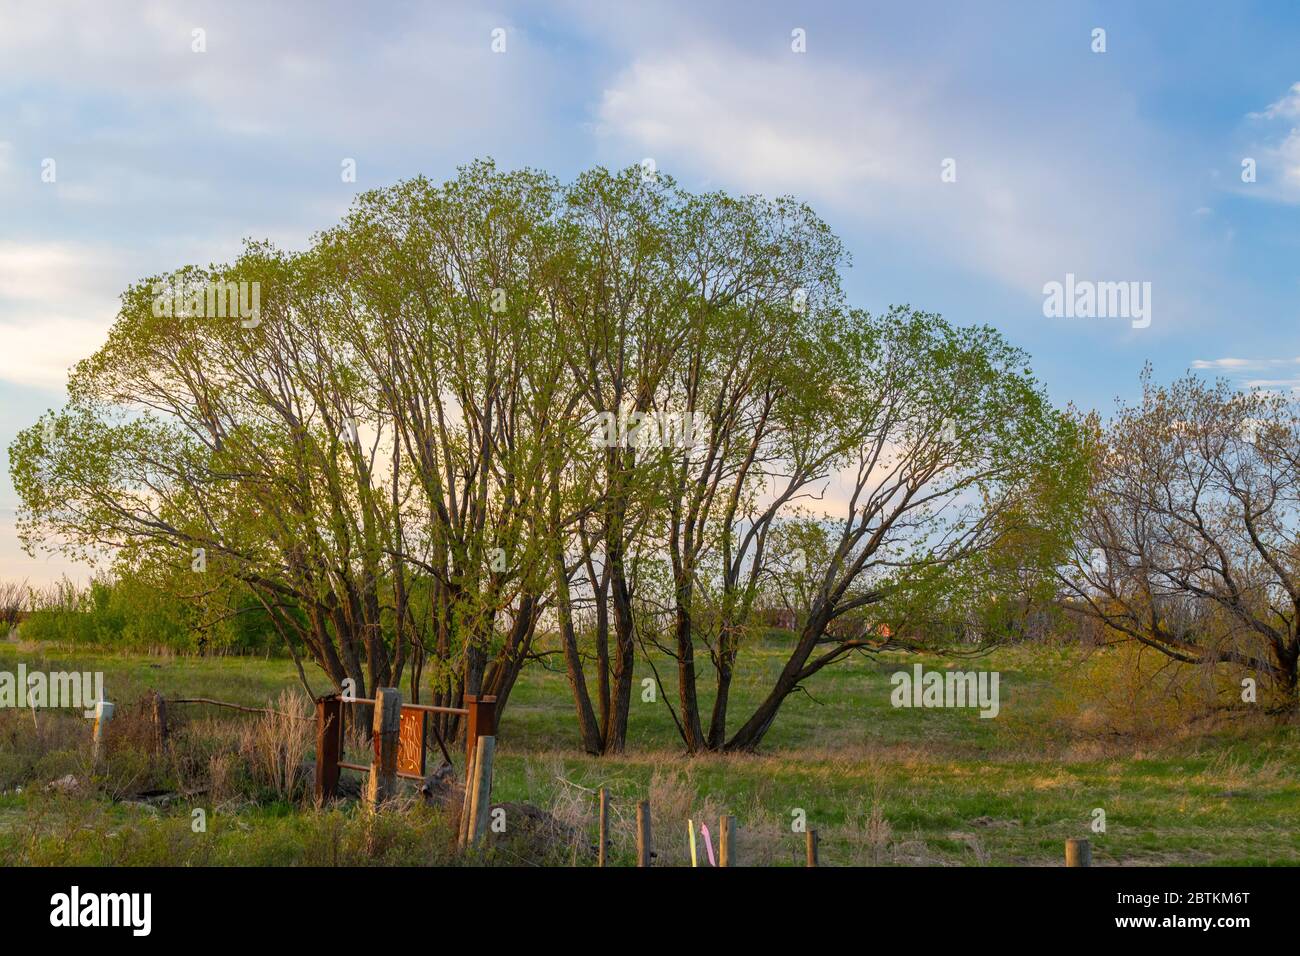 Trees growing in a small group near the outskirts of the city of Saskatoon in Saskatchewan, Canada during the evening golden hour Stock Photo